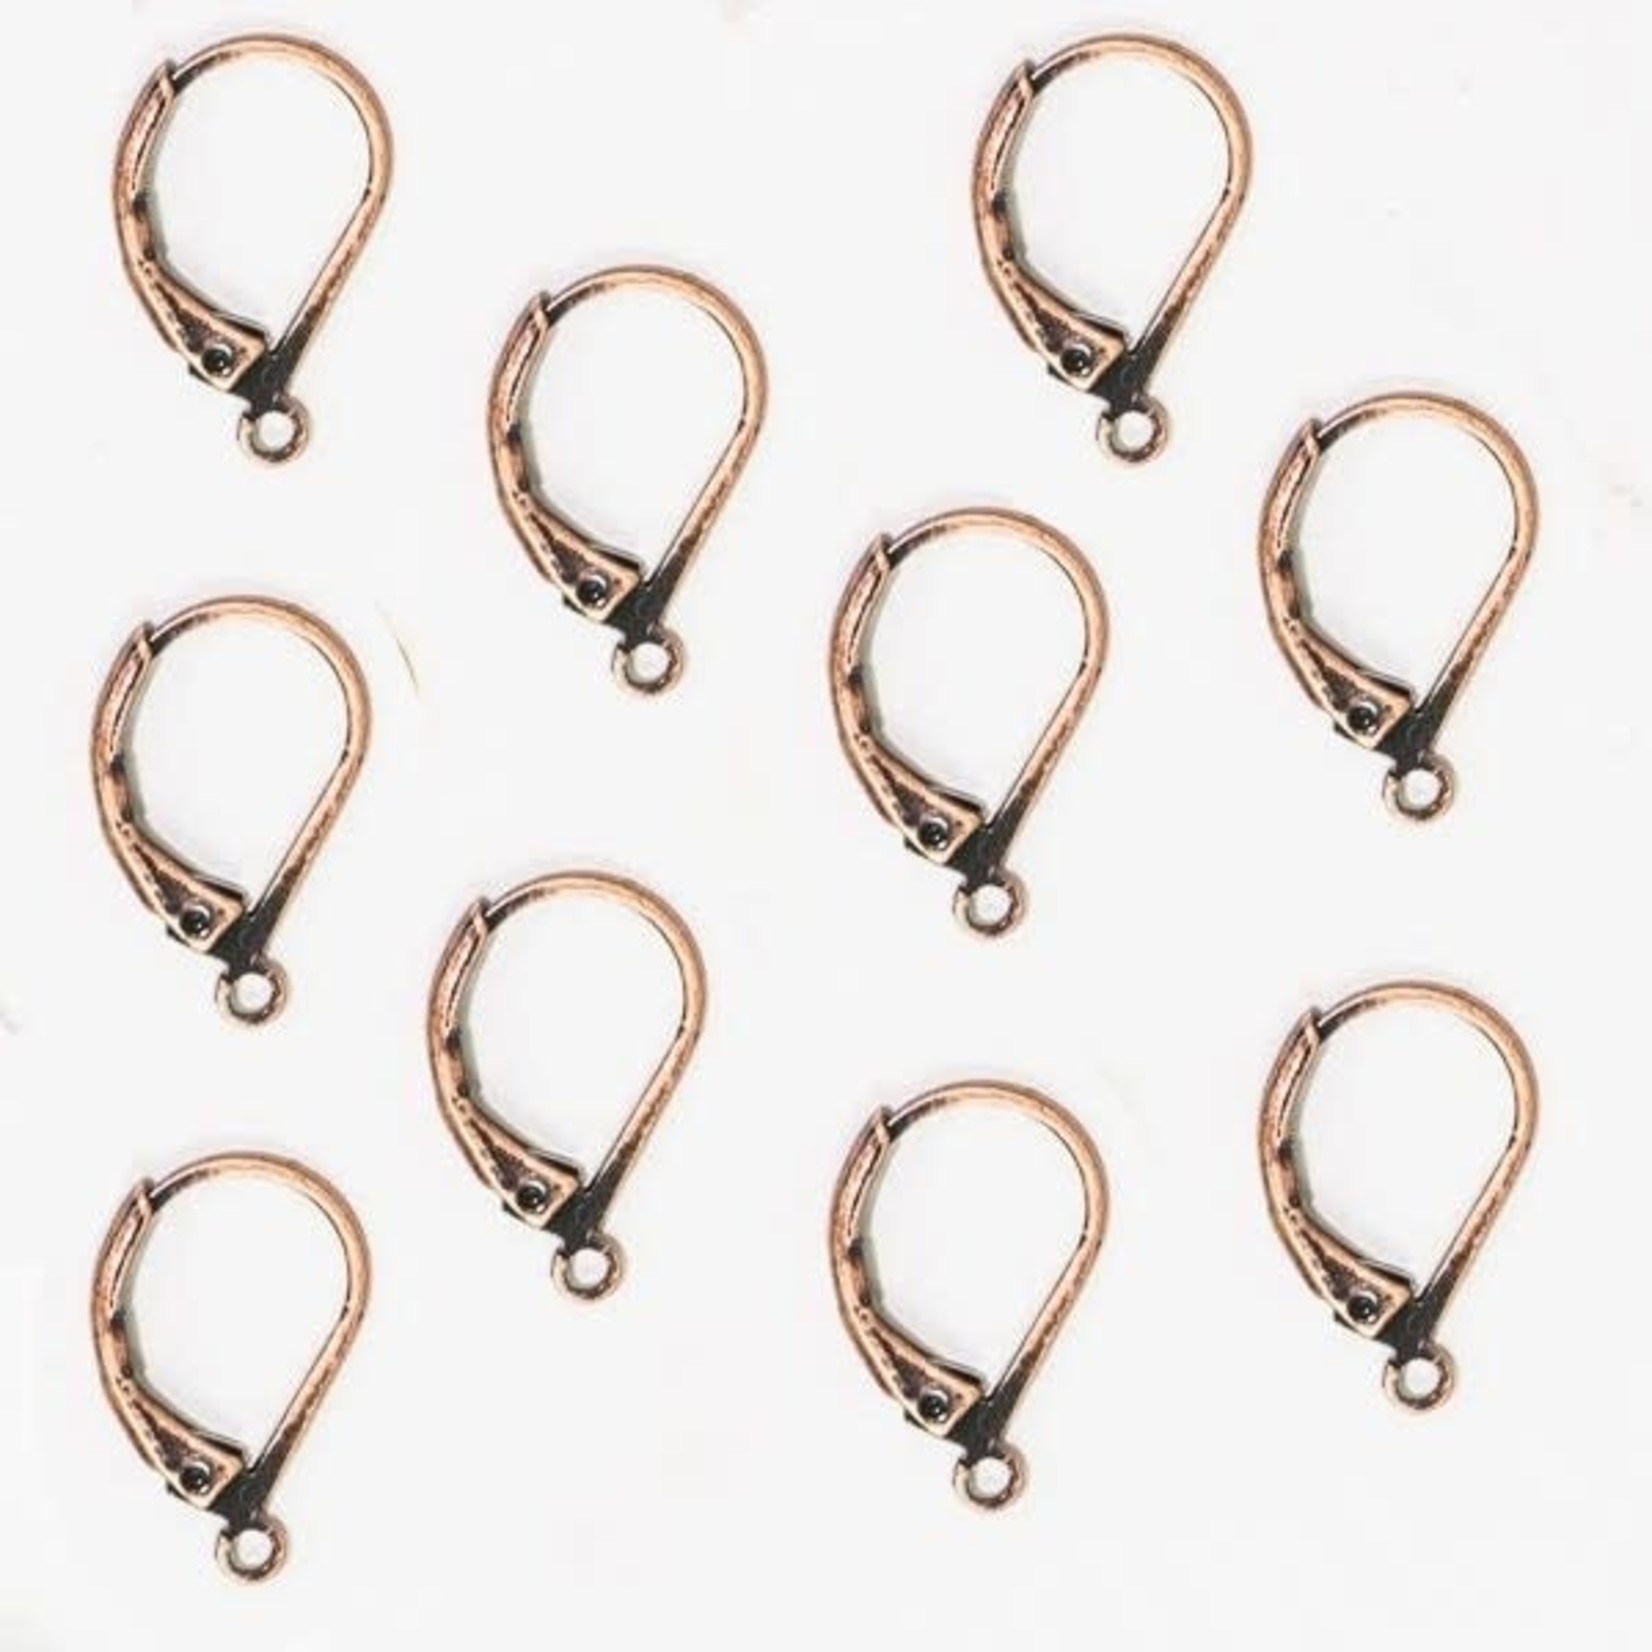 Antique Copper Plated Leverback Earwire 15x10mm Nickel-Free - 10 pieces